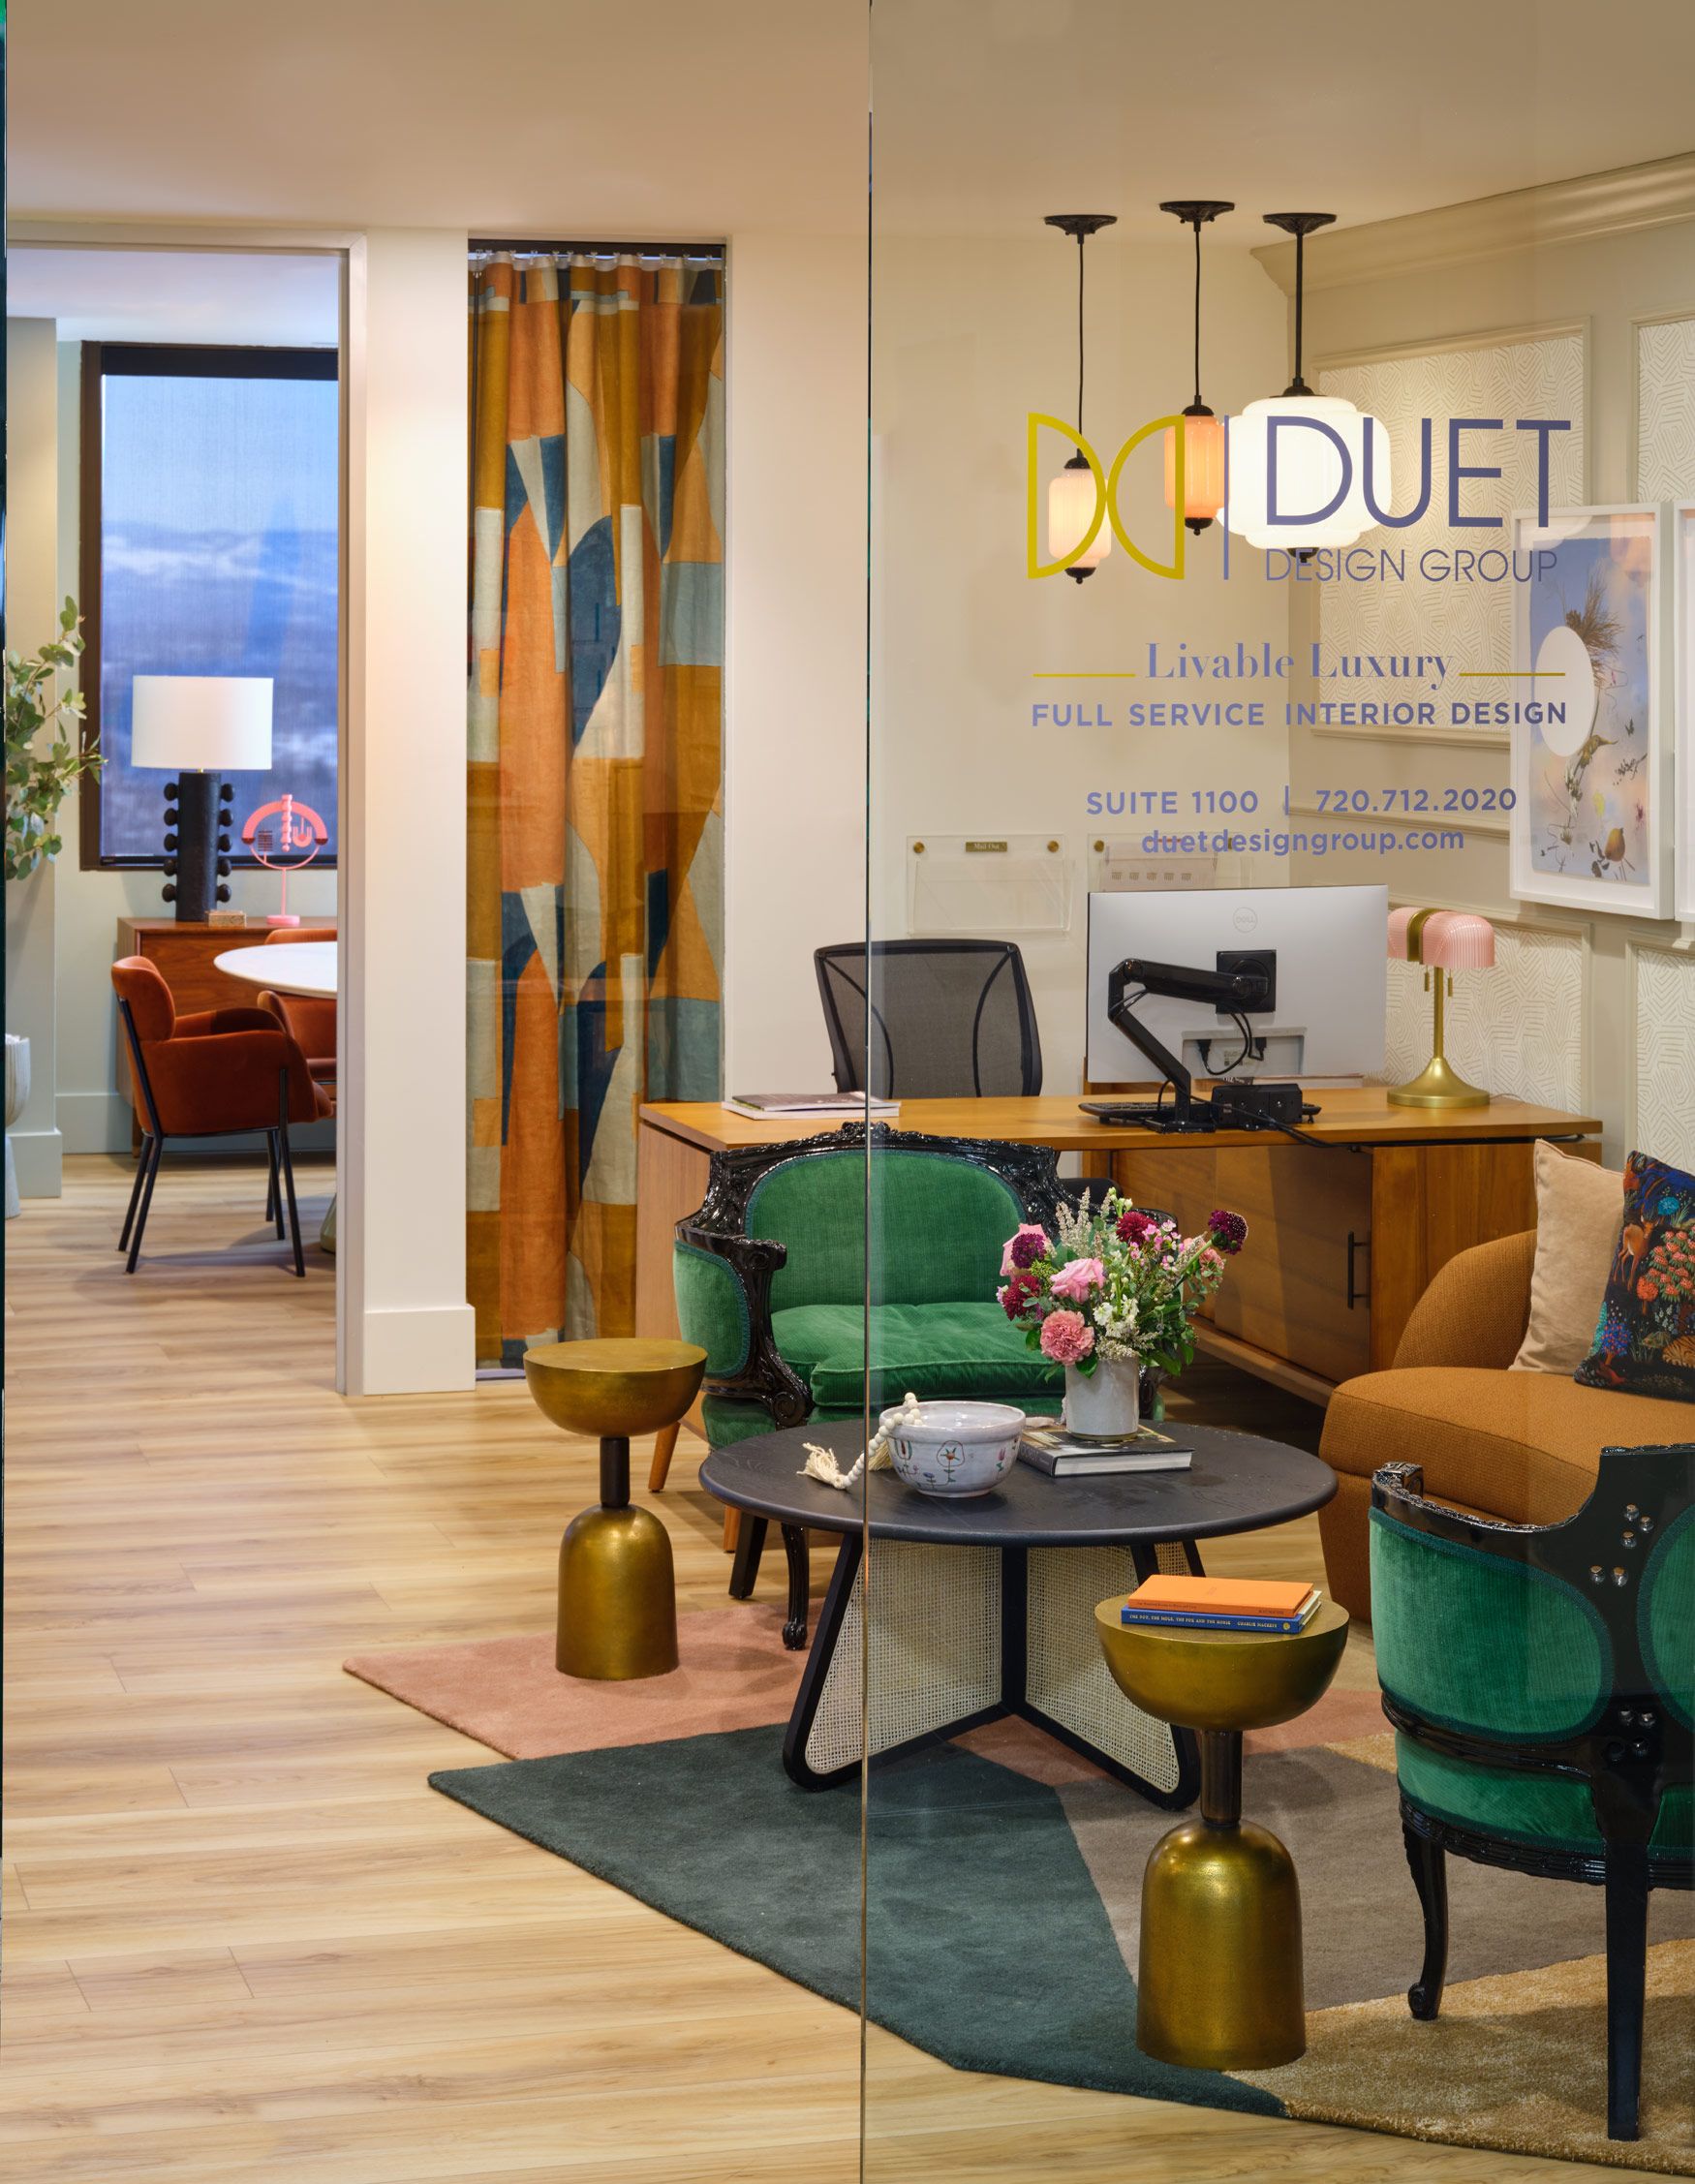 Duet Design Group: Creating Livable Luxury in Colorado & Beyond